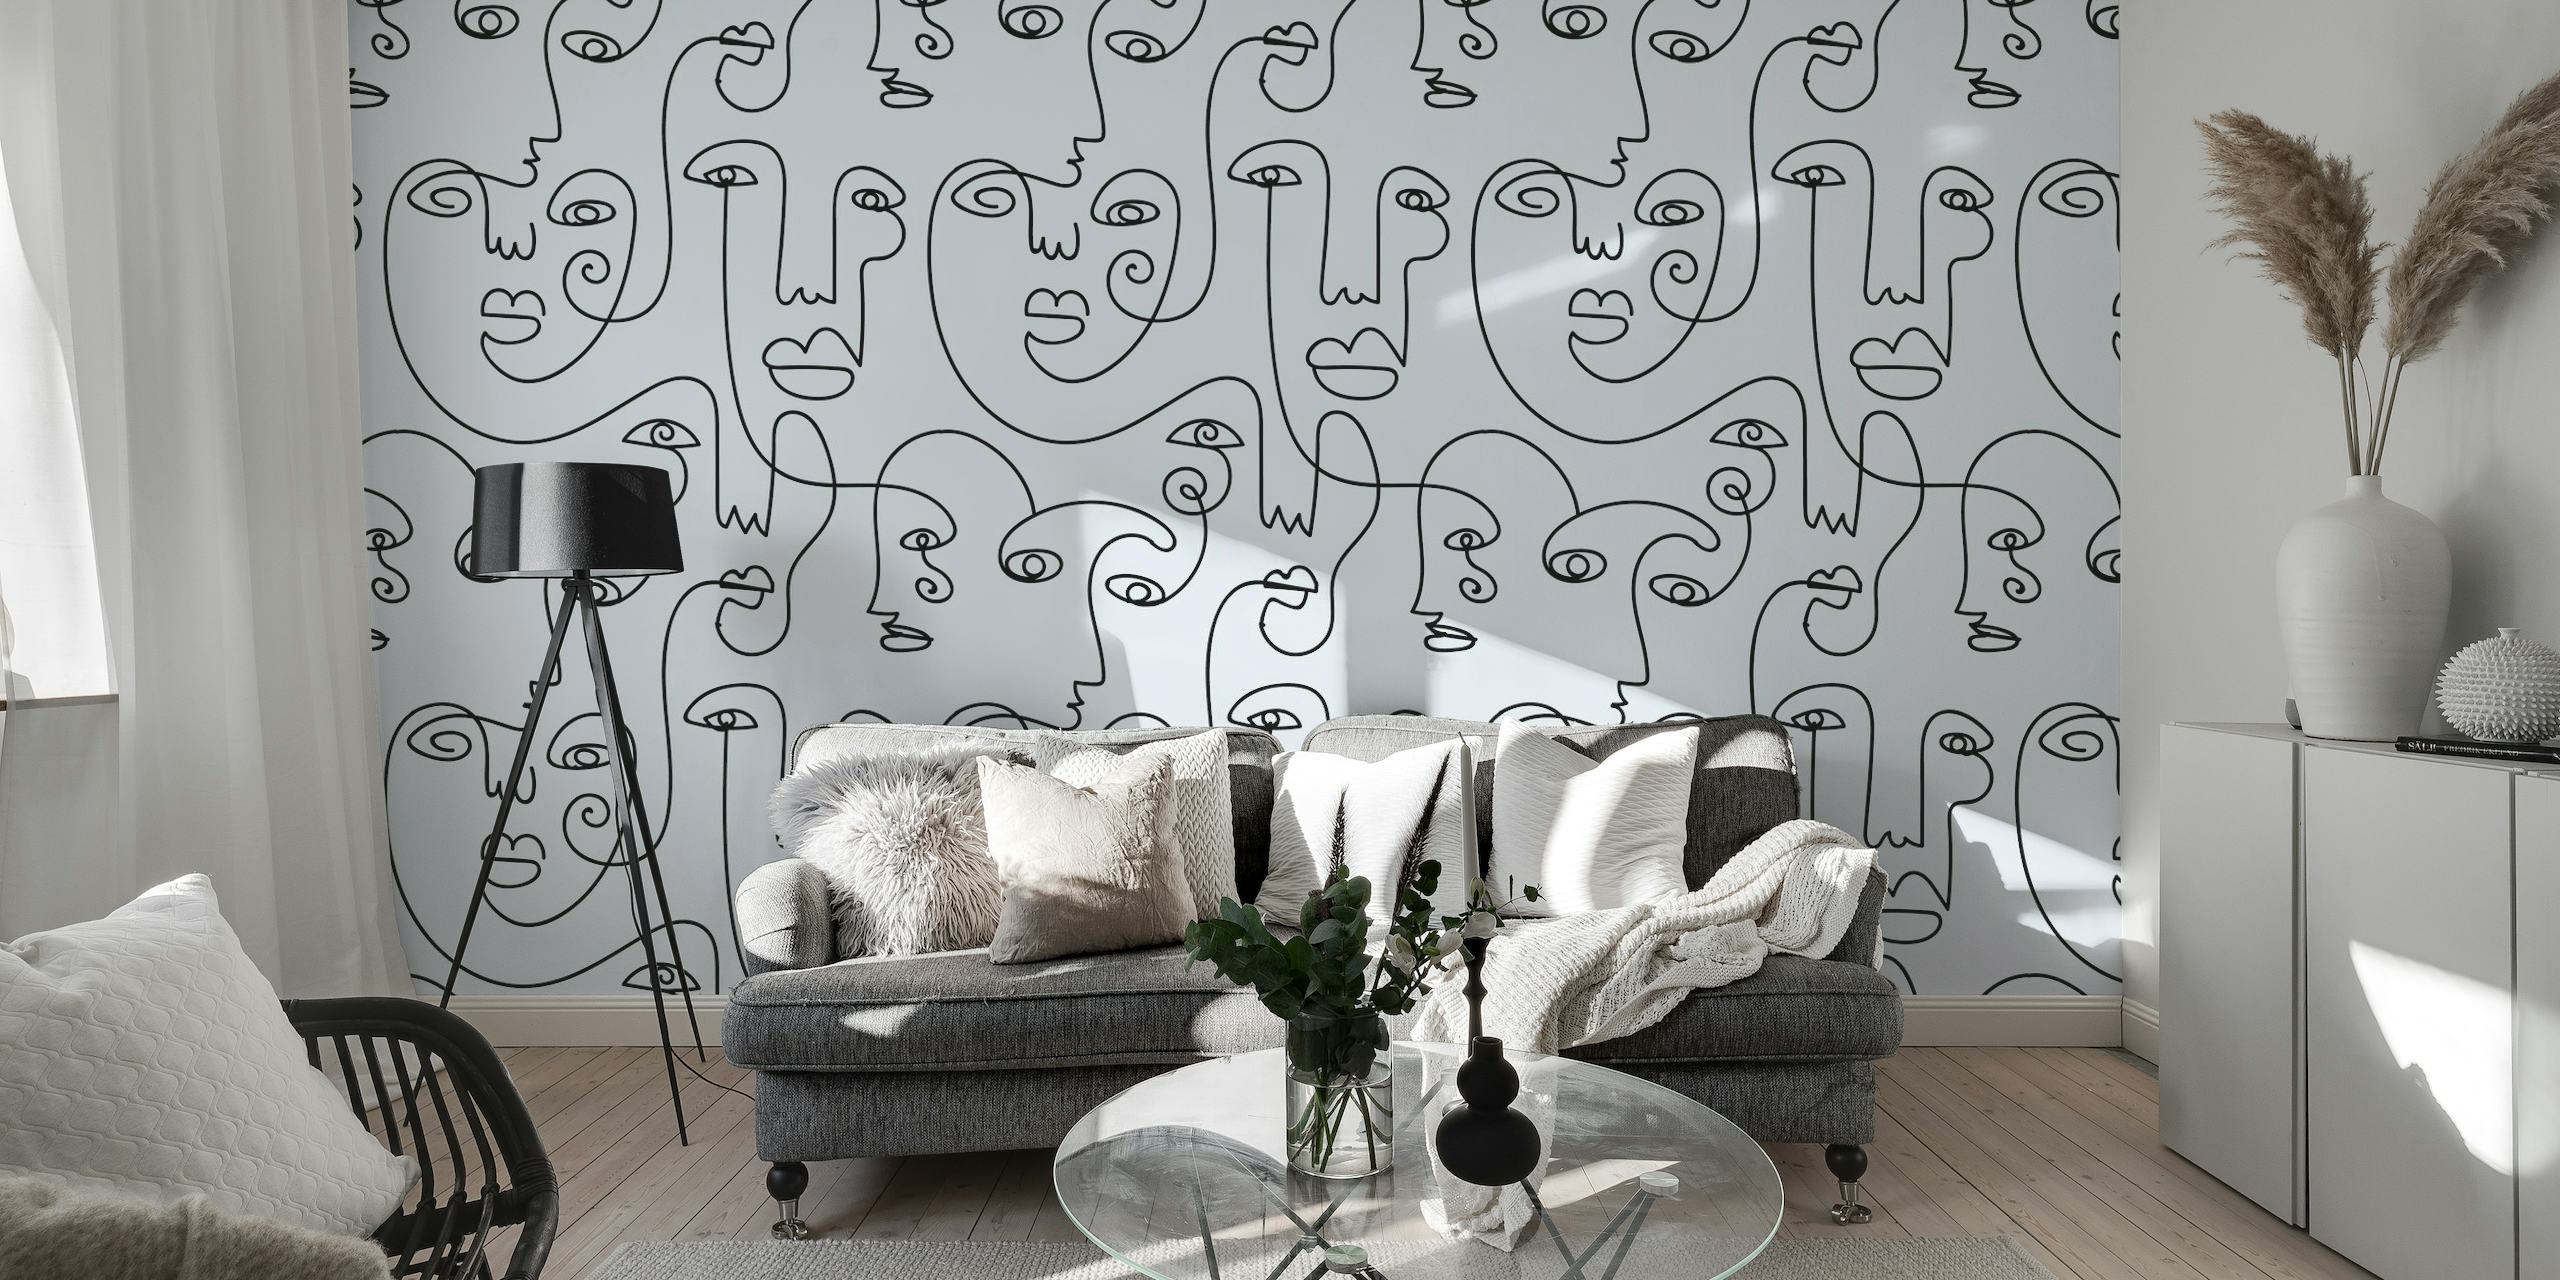 Abstract Picasso-Inspired Faces Wall Mural by HappyWall